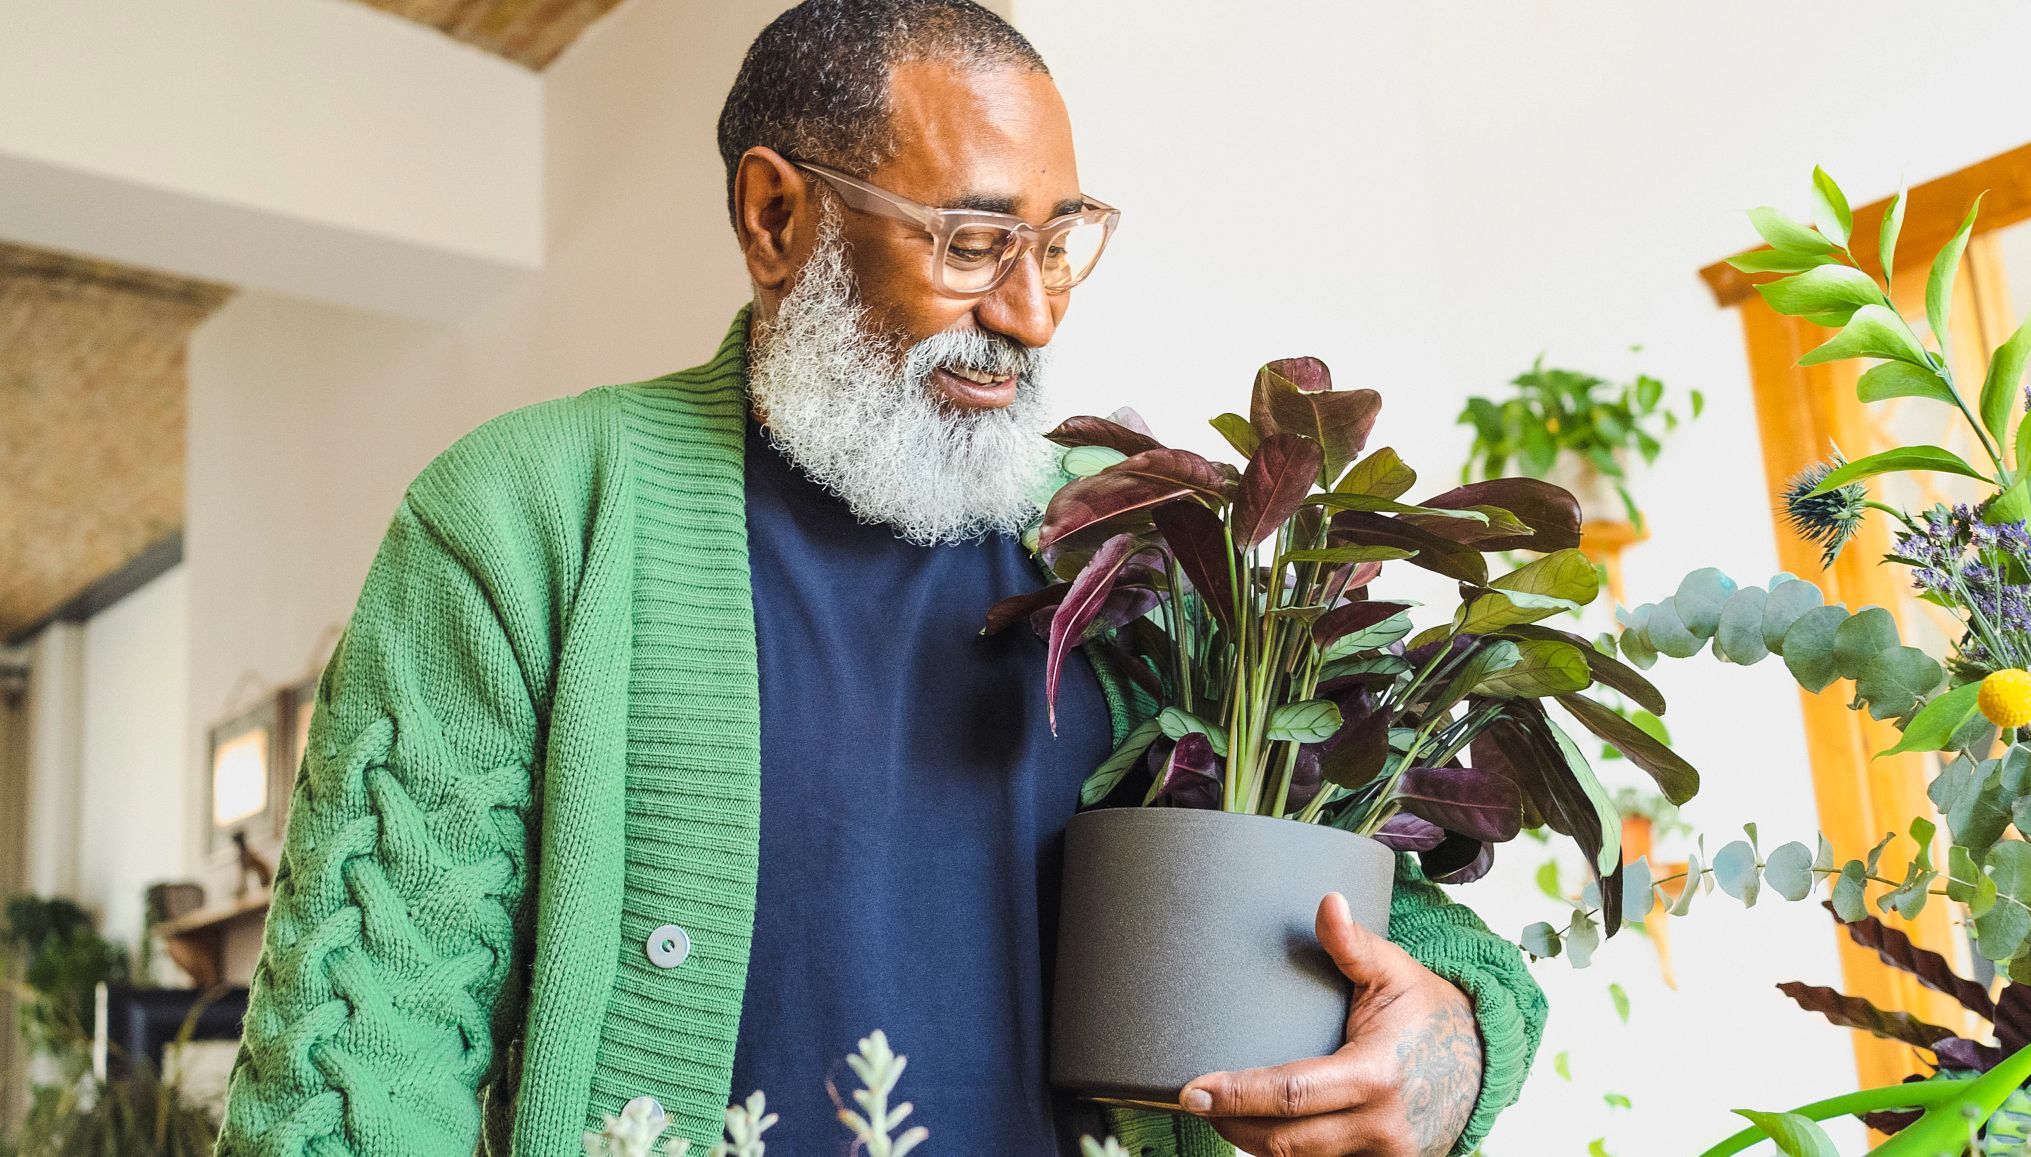 man examines a potted plant